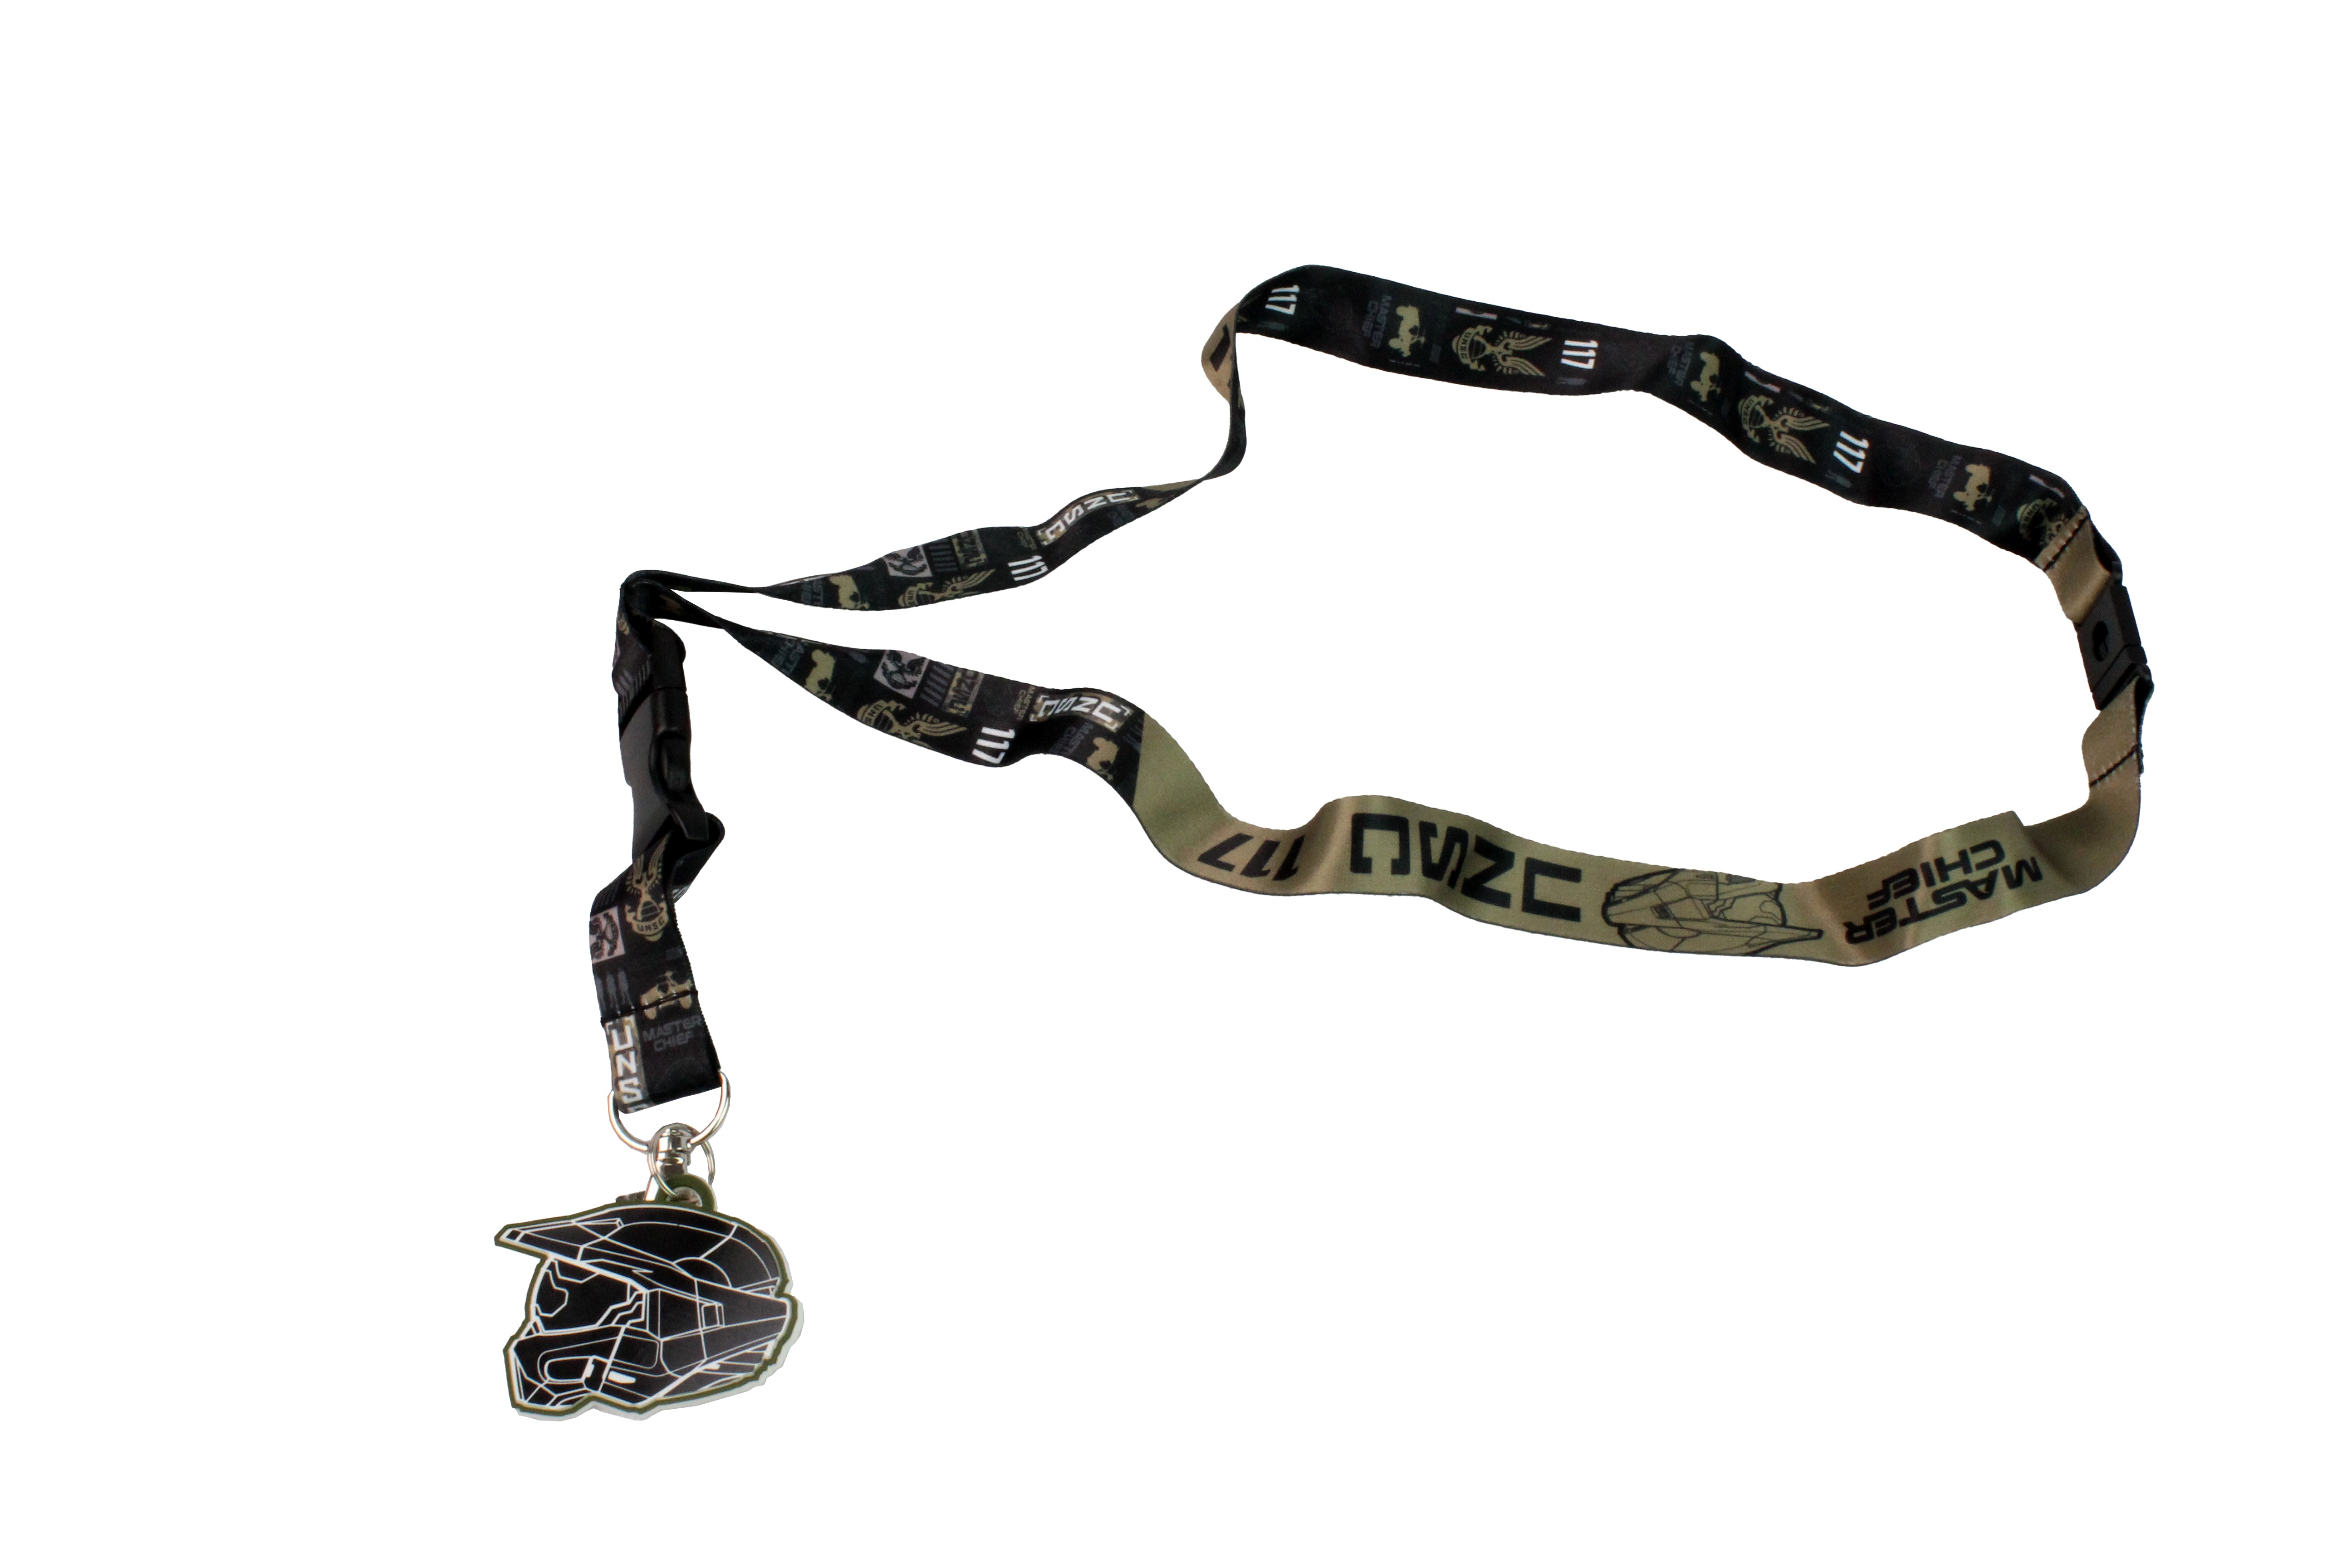 Halo UNSC 117 Master Chief Black & Gold Lanyard Keychain w/ 2 Rubber